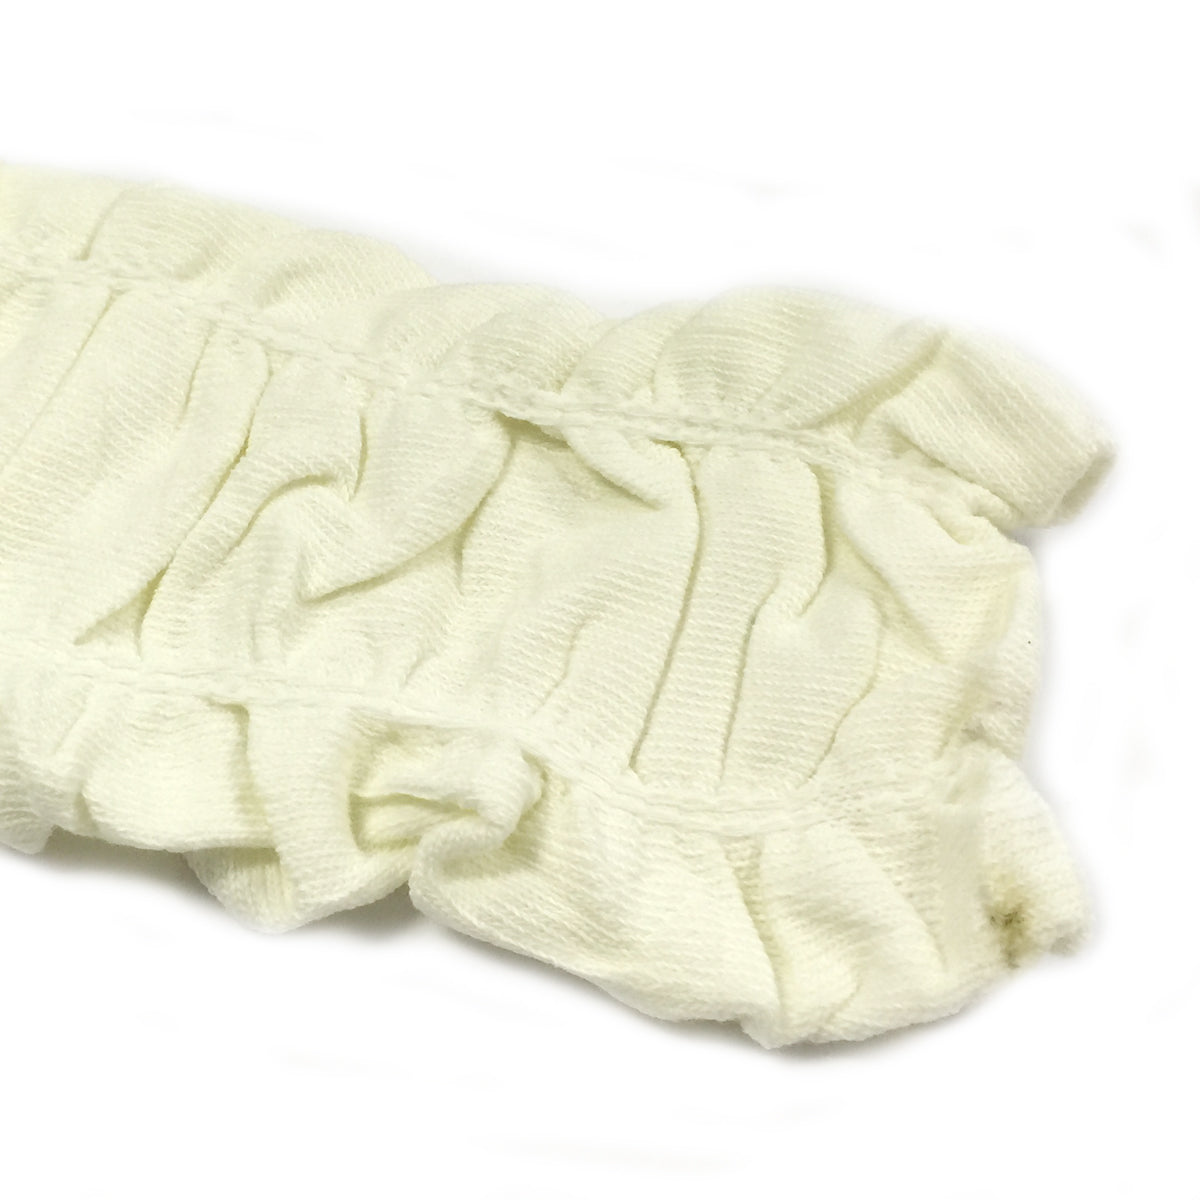 Wrapables Ruffle Leg Warmers for Toddler